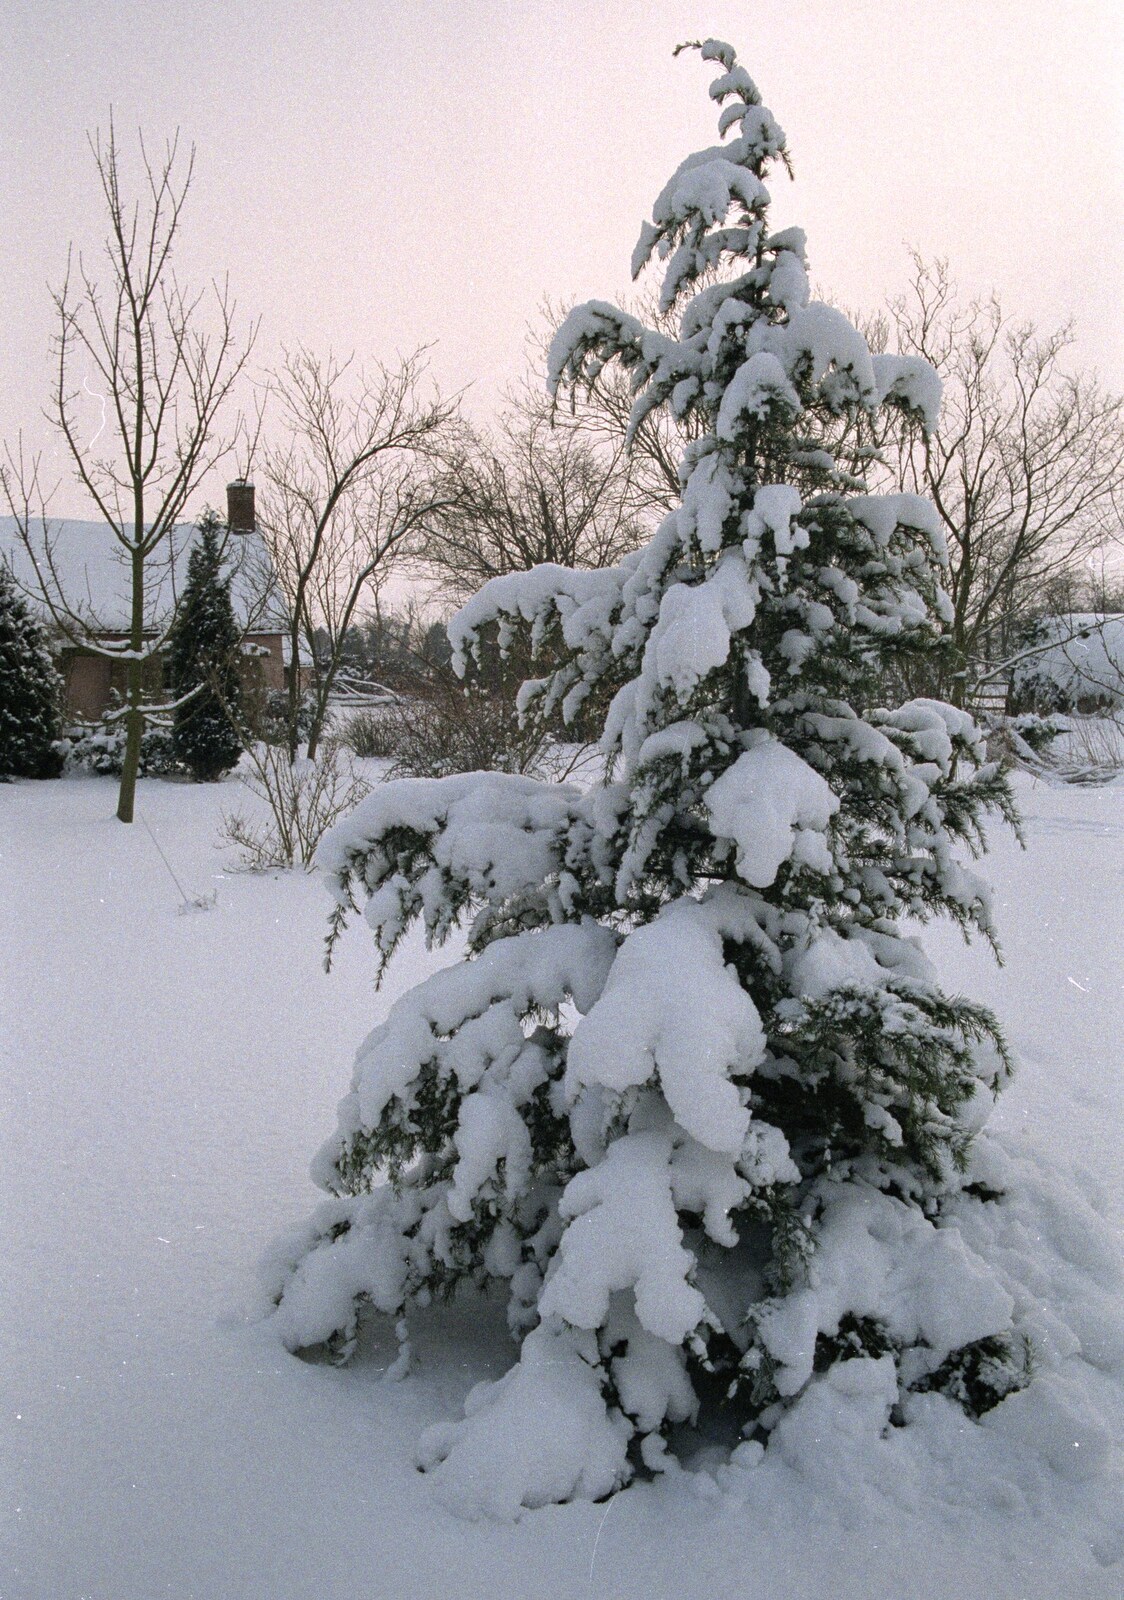 A kind of snowy Christmas tree from Snow Days, Stuston and Norwich, Suffolk and Norfolk - 4th February 1991